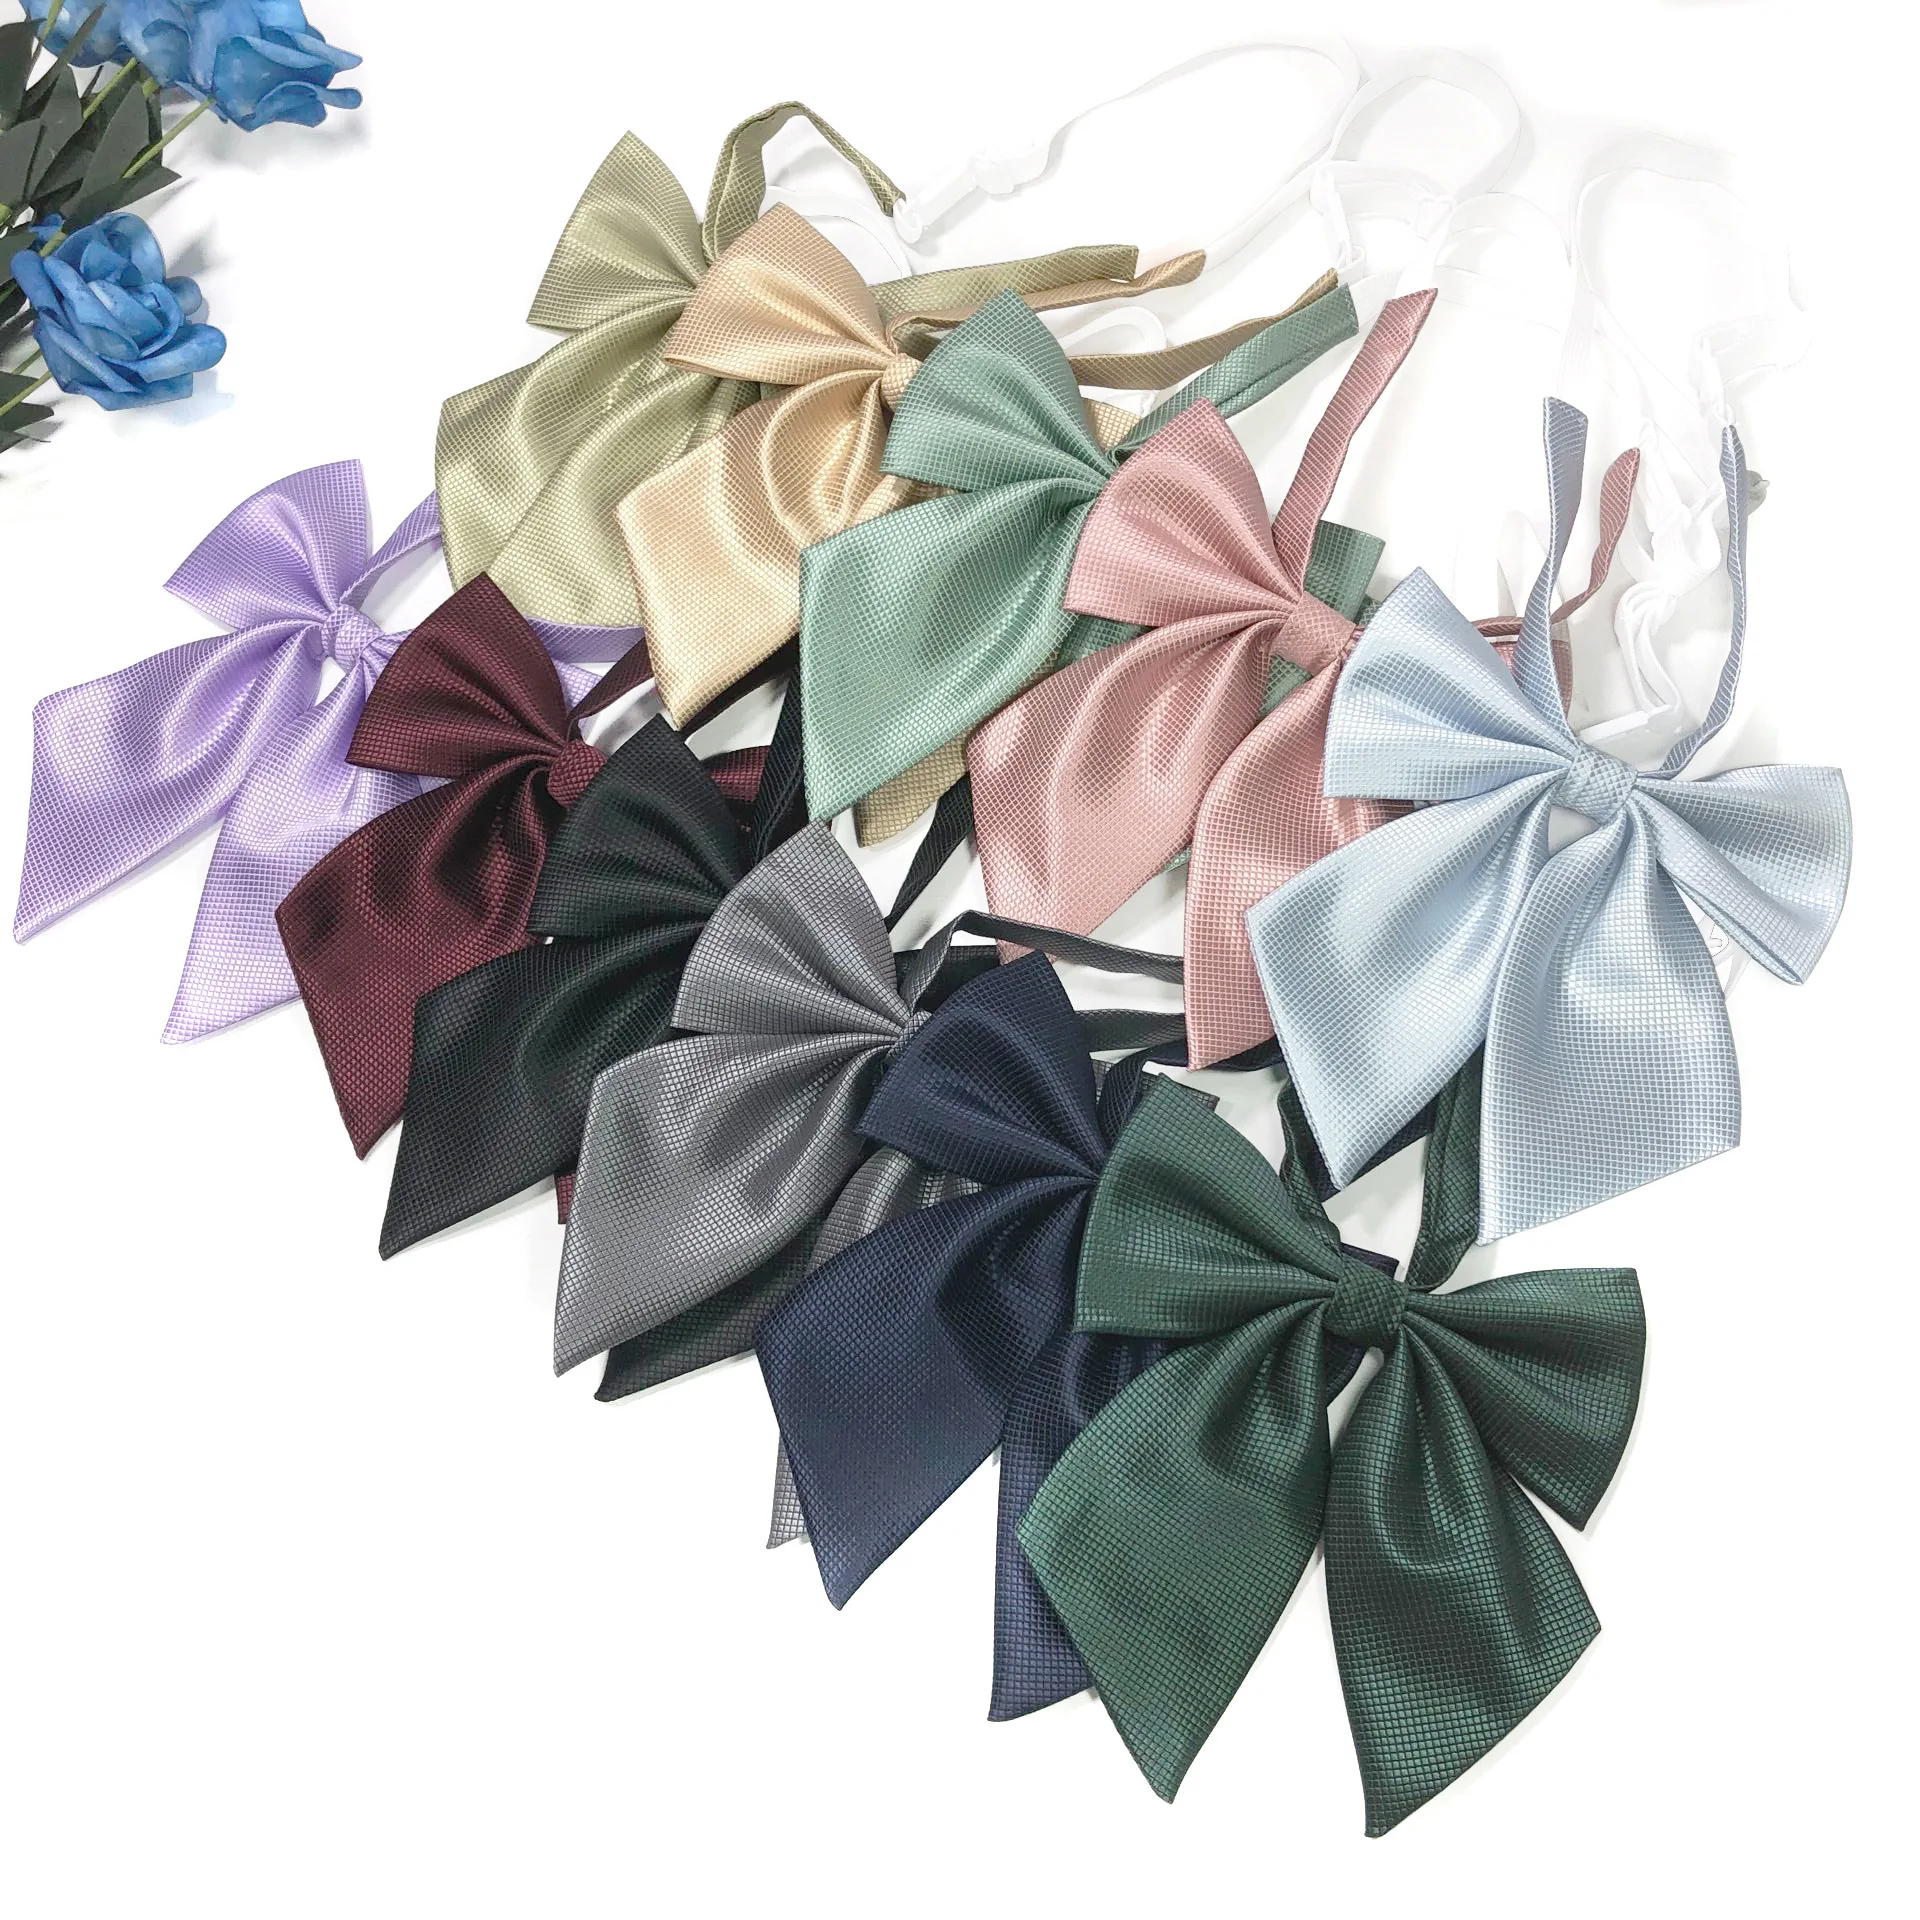 Factory Price Bowtie Classic Bow tie For Women Bowknot Casual Boys Girls Cravats Bow ties For Proms Party Butterfly Tie